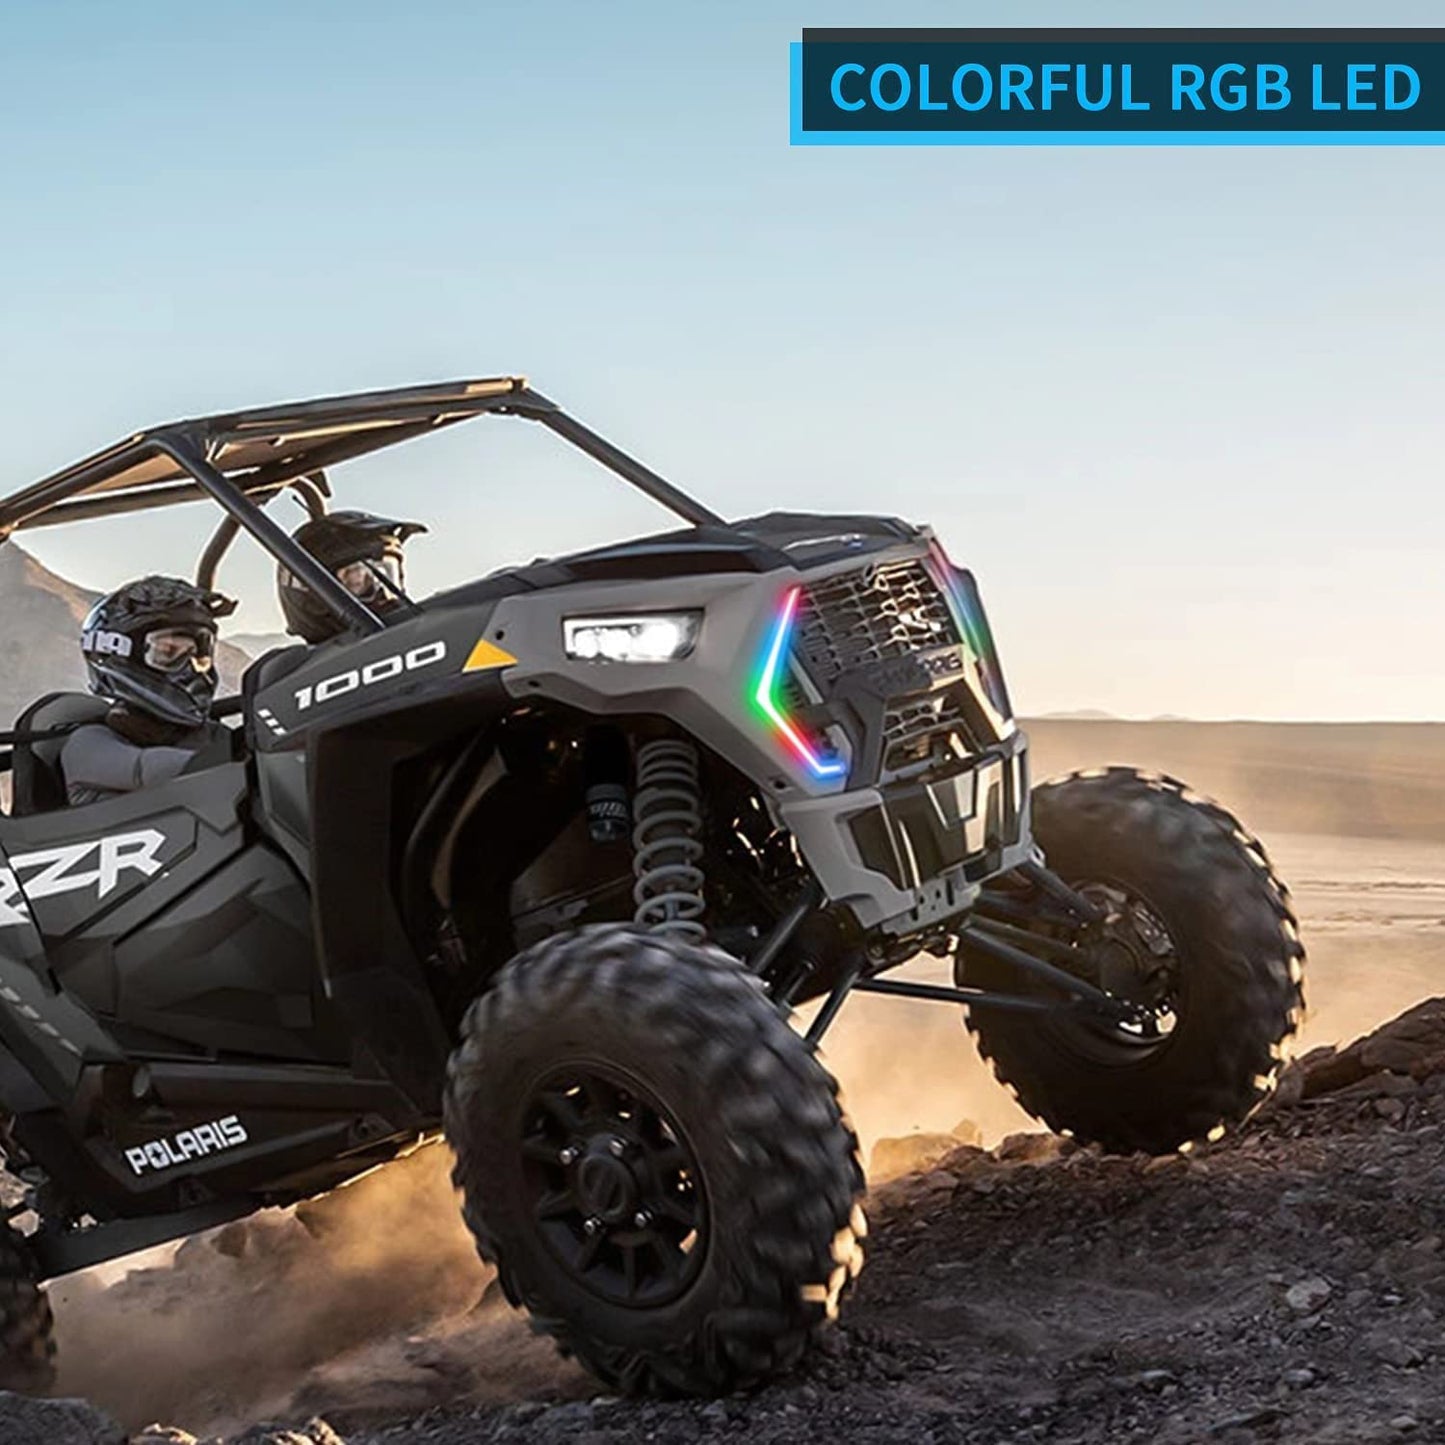 Polaris RZR RGB Turn Signal Fang Light,Bluetooth and Remote Control Spiral RGB Chase Light Compatible for 2019 2020 2021 Polaris RZR XP 1000 Turbo